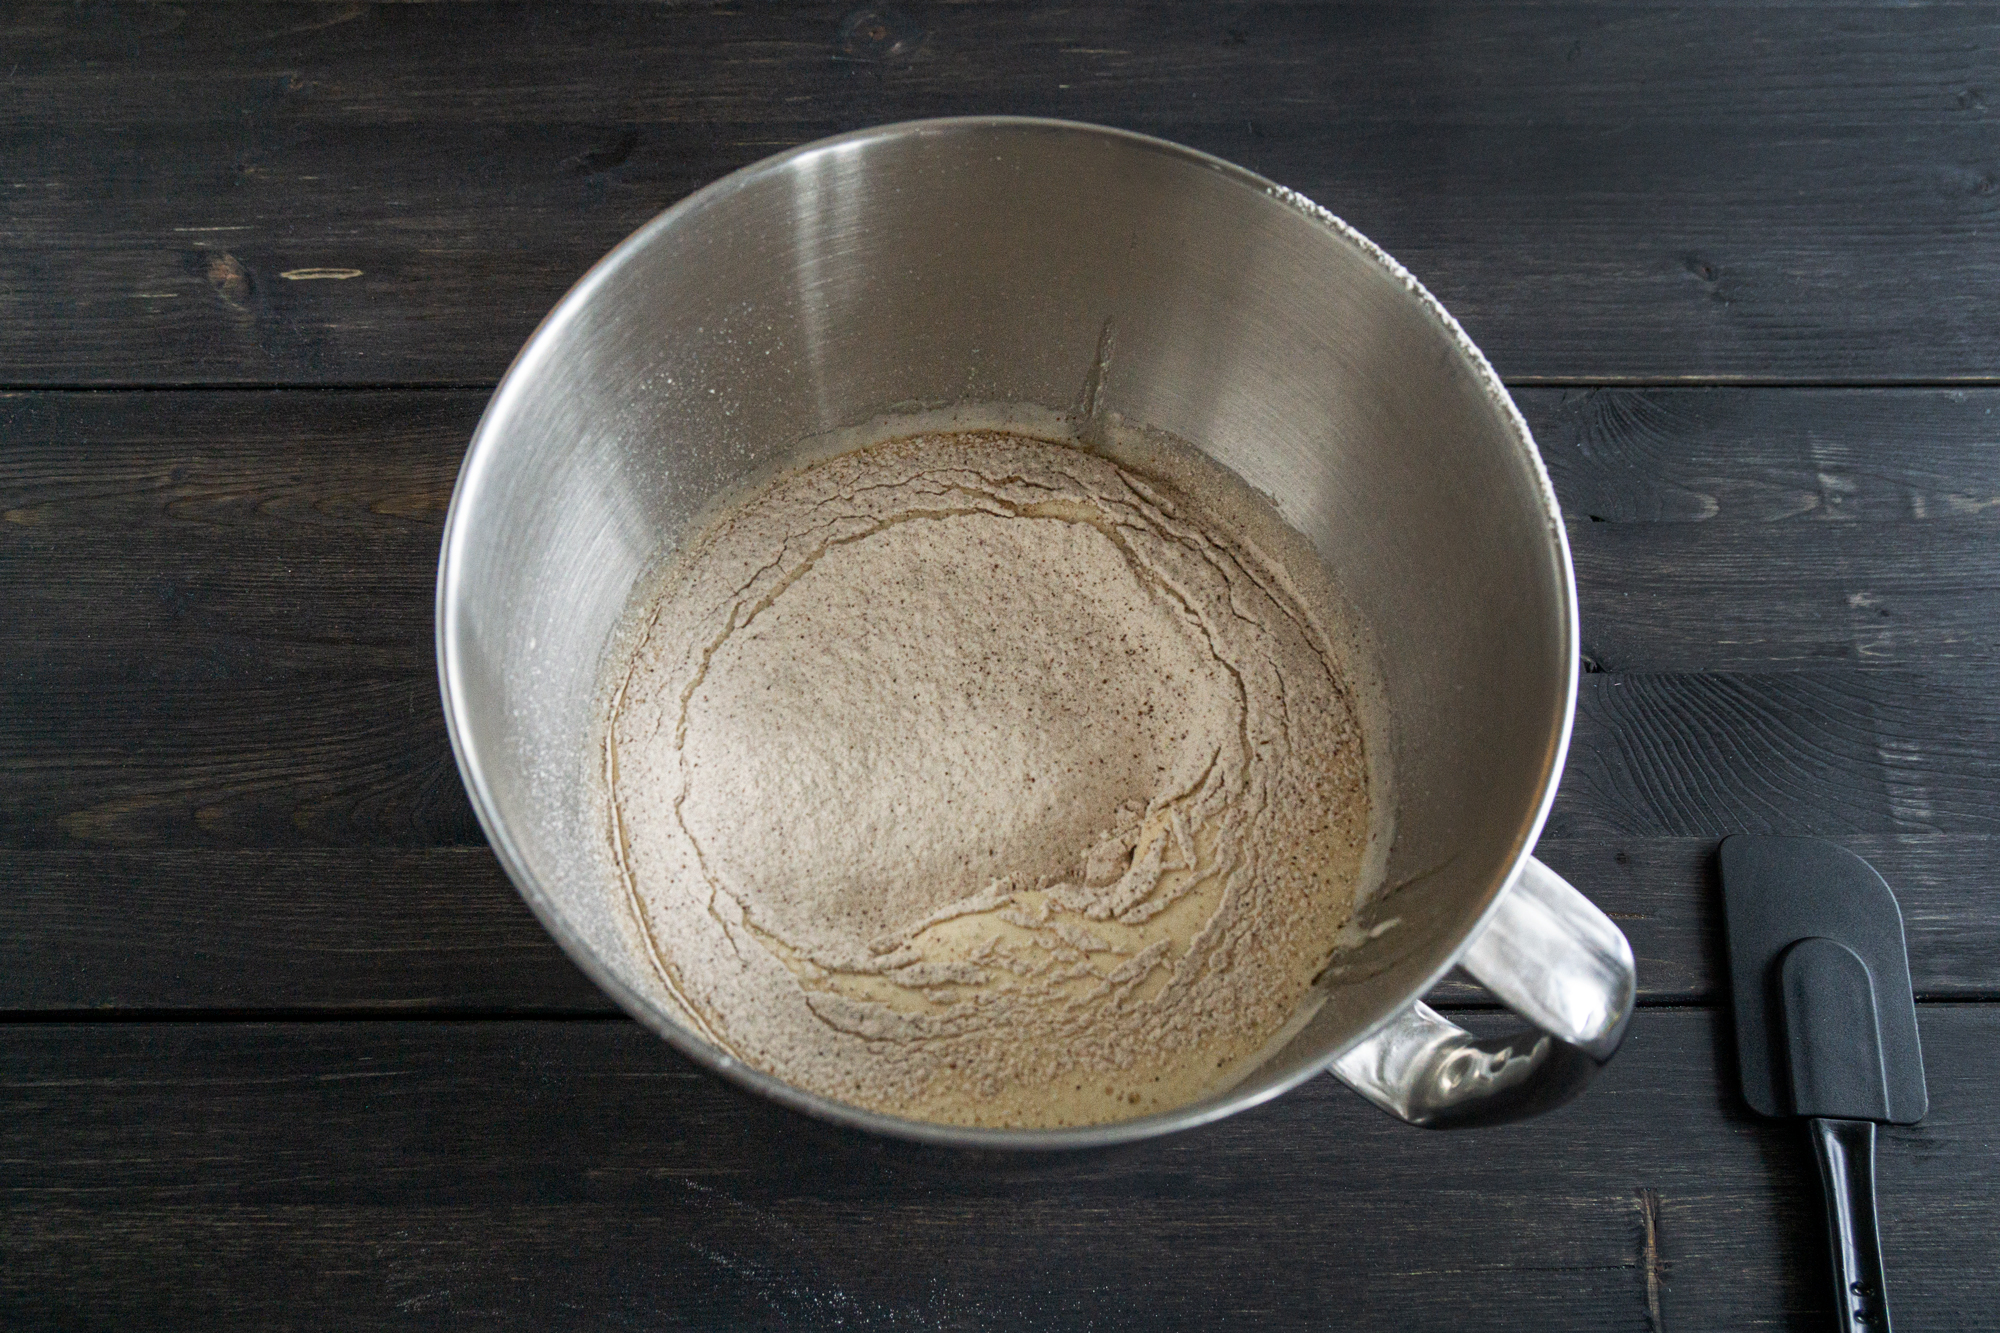 Flour sifted into the cake batter